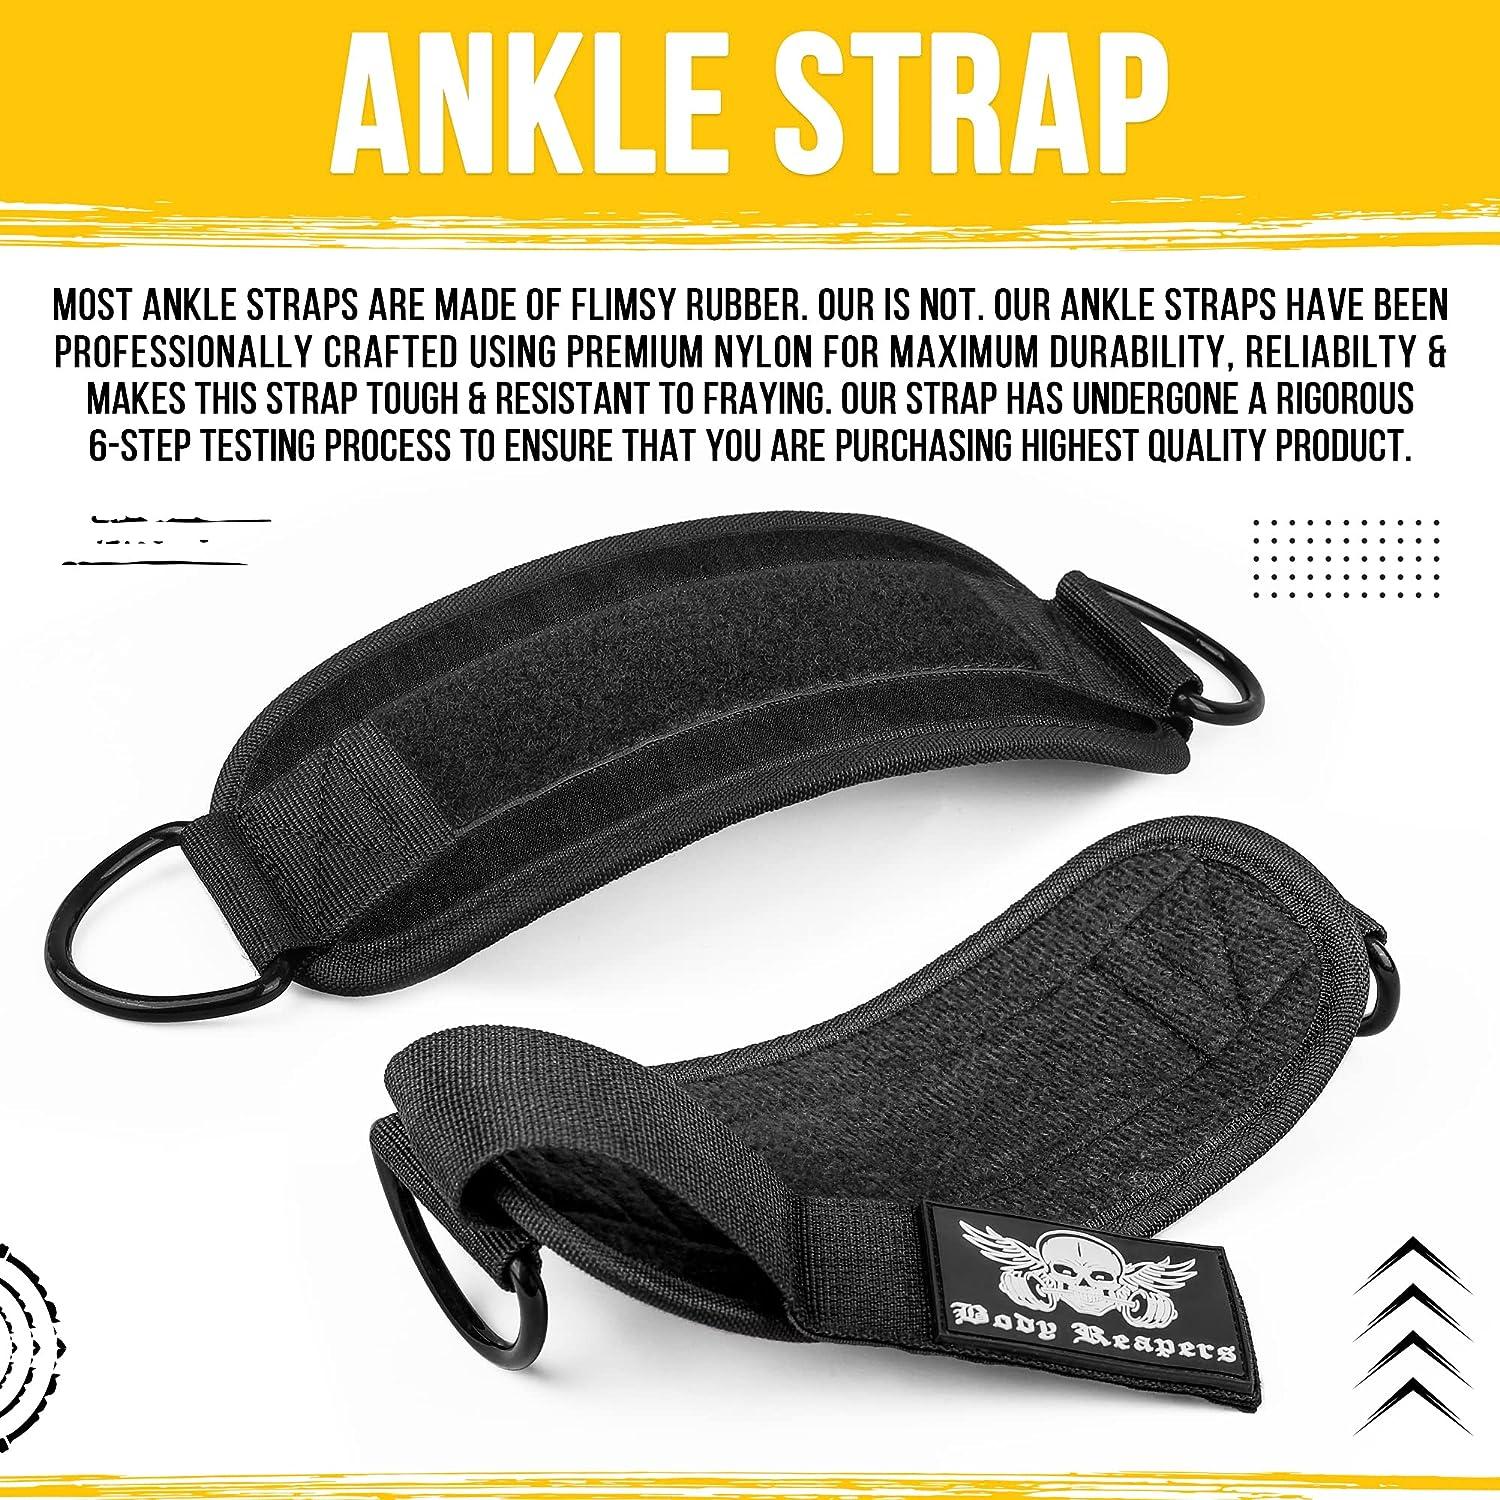 Body Reapers Gym Ankle Strap for Cable Machine, Adjustable Ankle Straps for  Working Out, Neoprene Padded for Glute kickbacks & Lower Body Exercises,  Ankle Cuffs for Men & Women Gym Accessories Pair